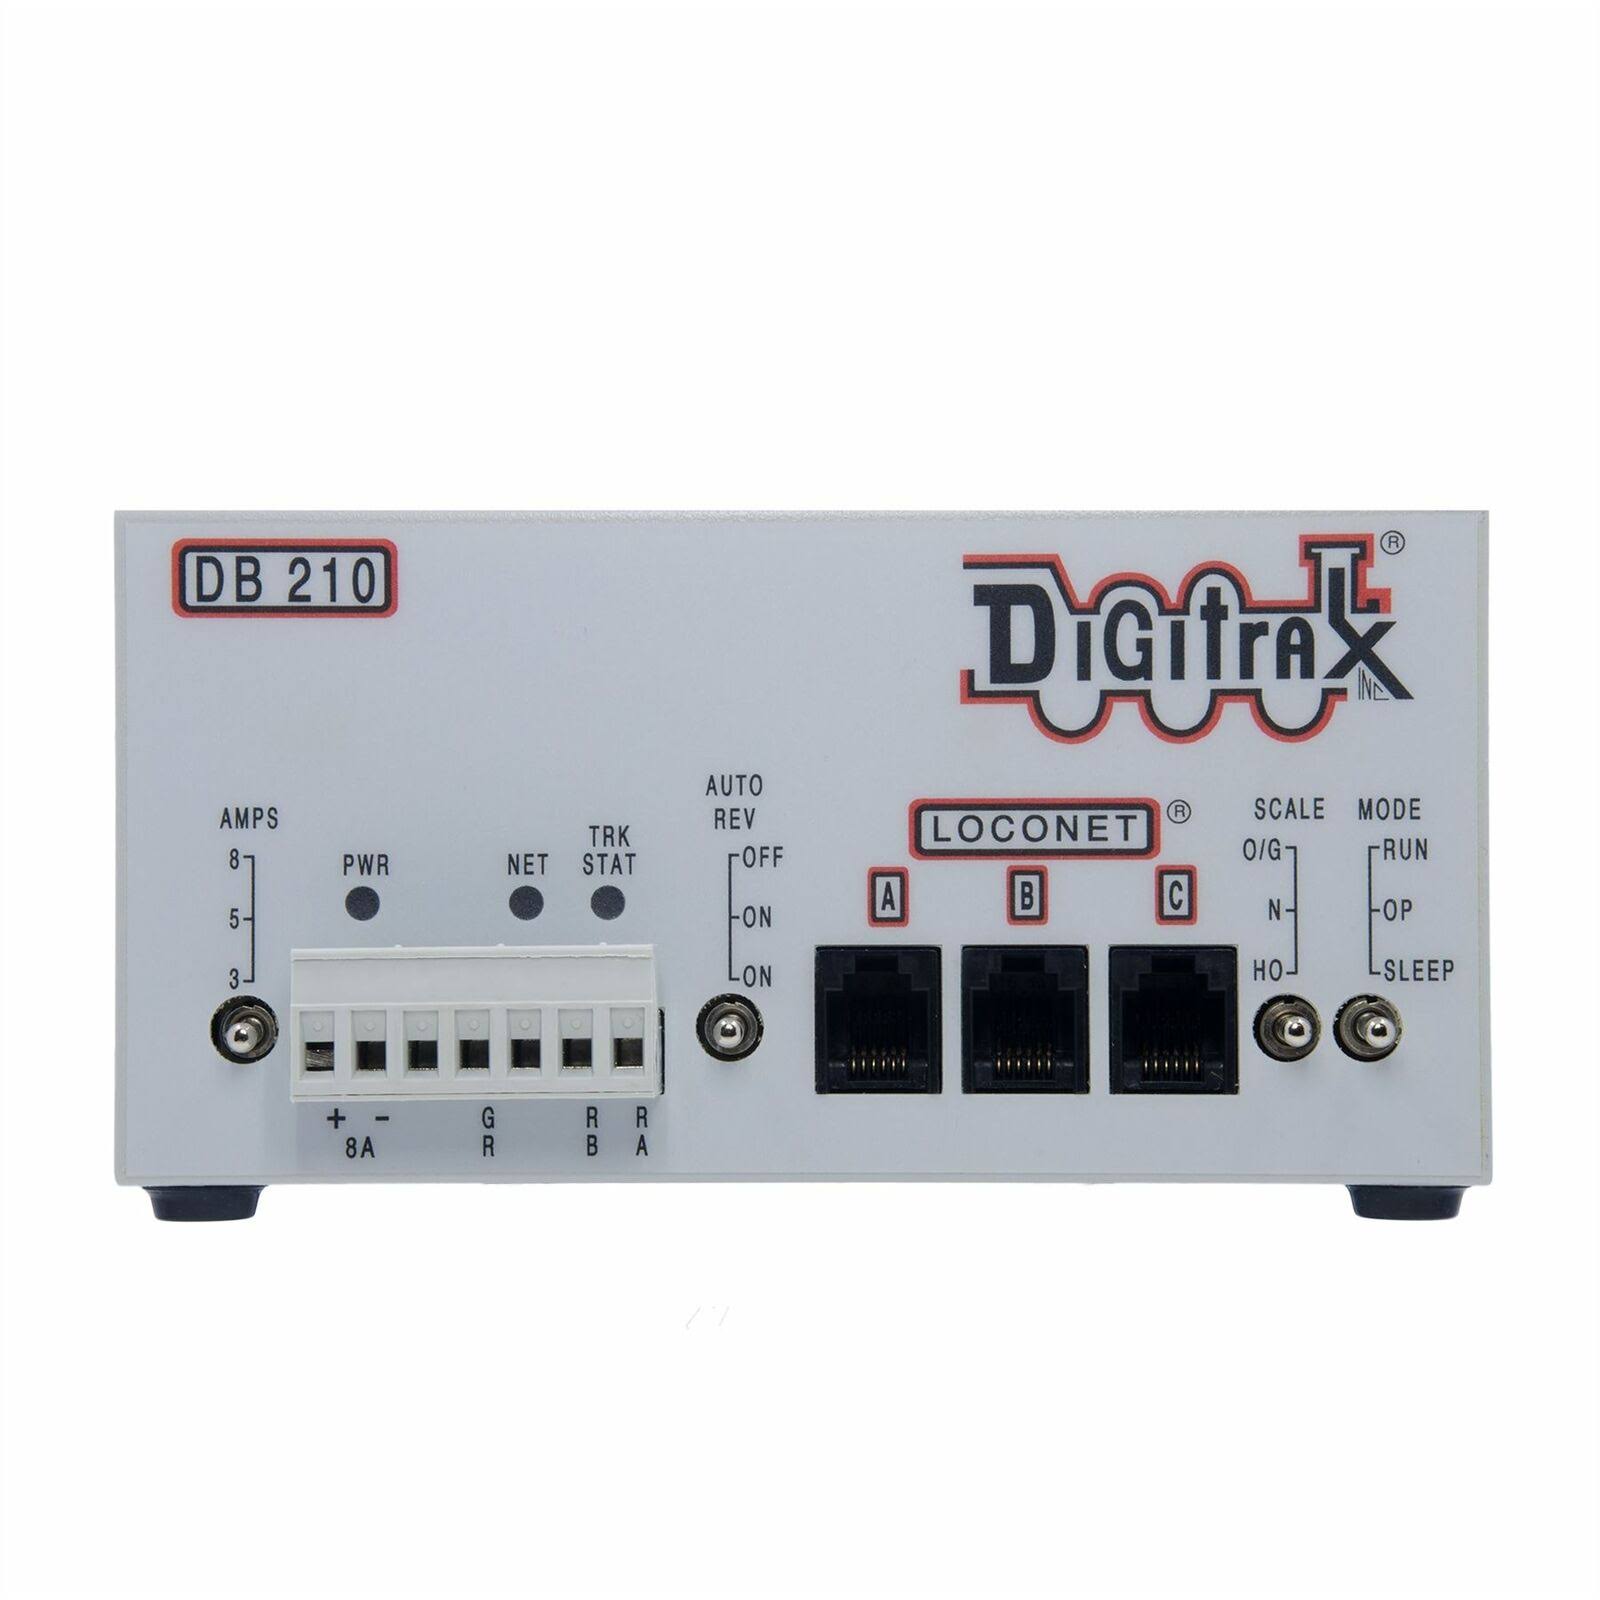 DIGITRAX ALL SCALE SINGLE AUTOREVERSE DCC BOOSTER DB210